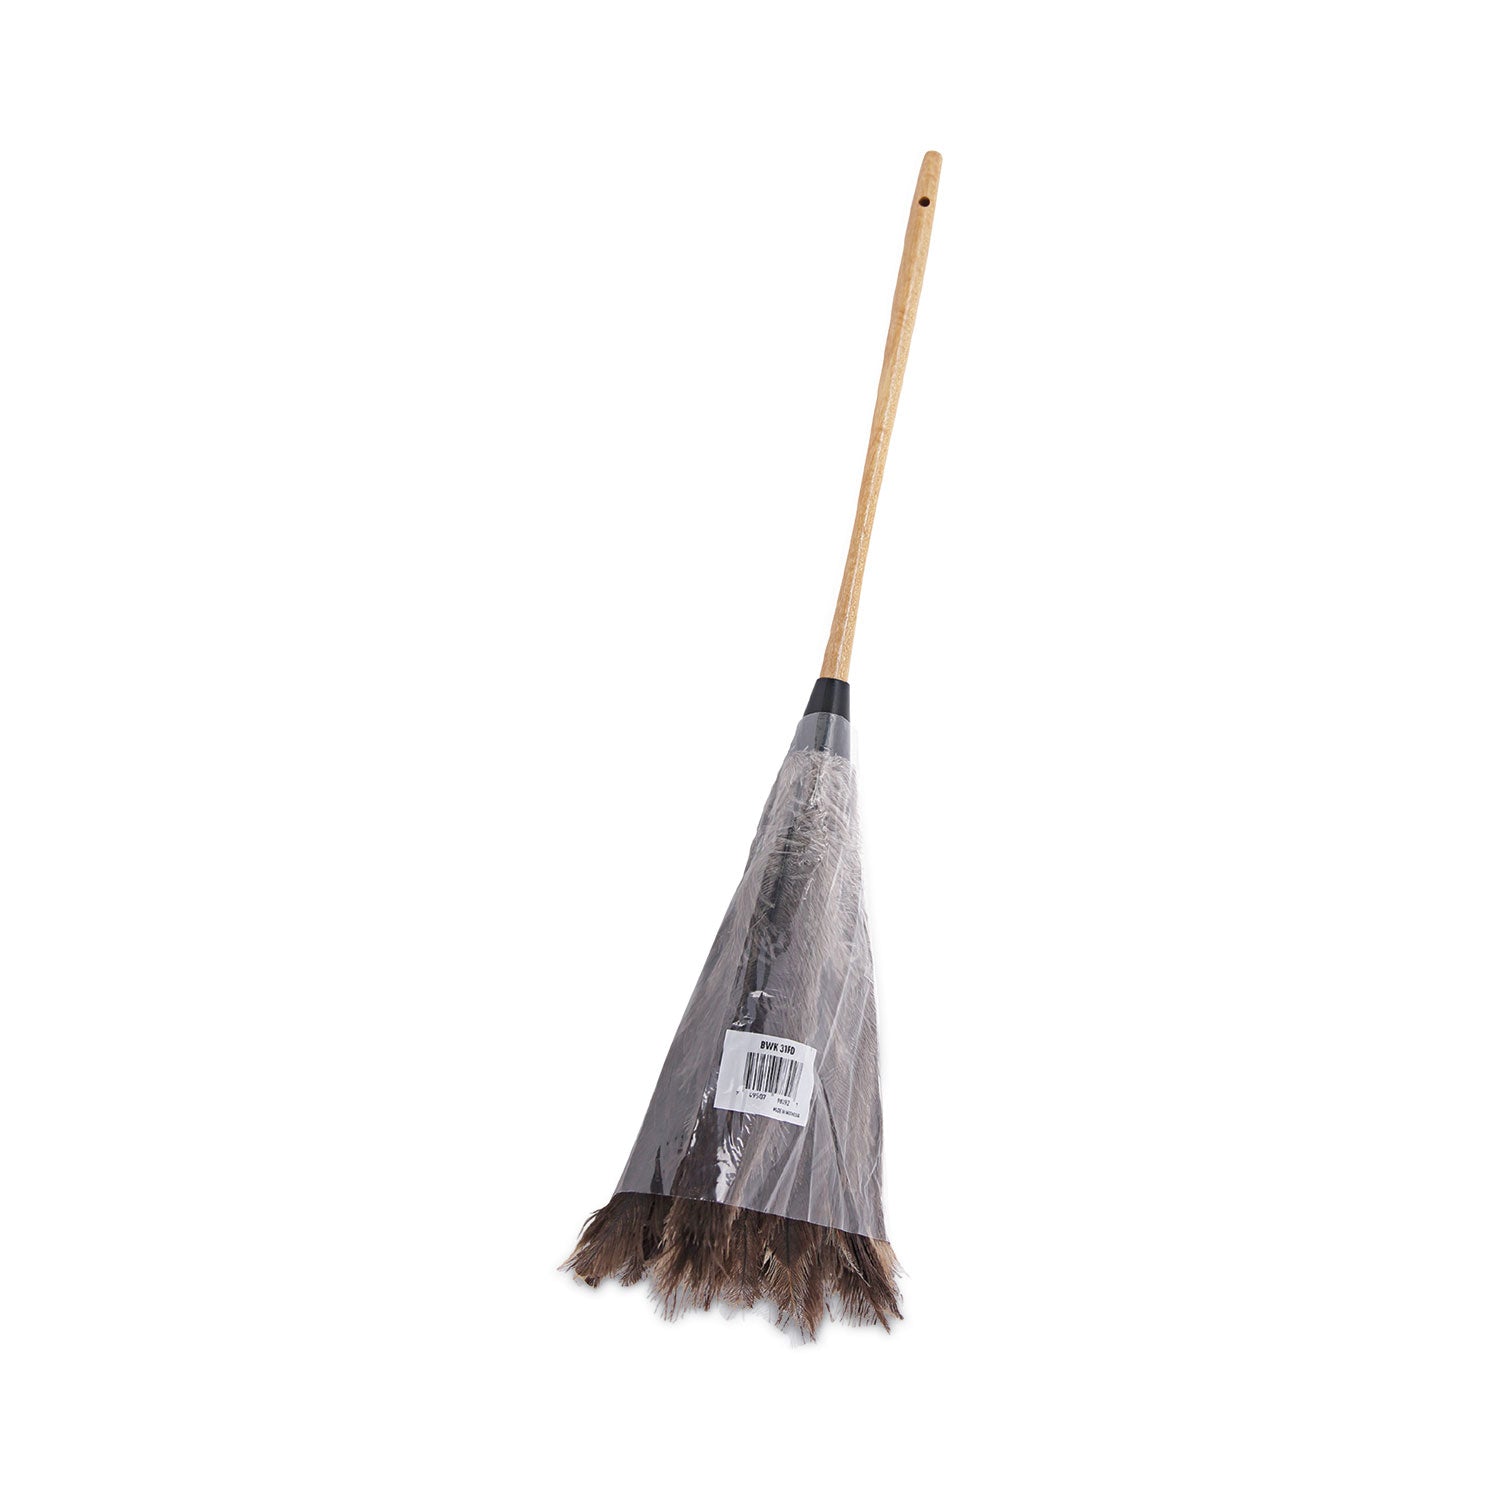 professional-ostrich-feather-duster-16-handle_bwk31fd - 7